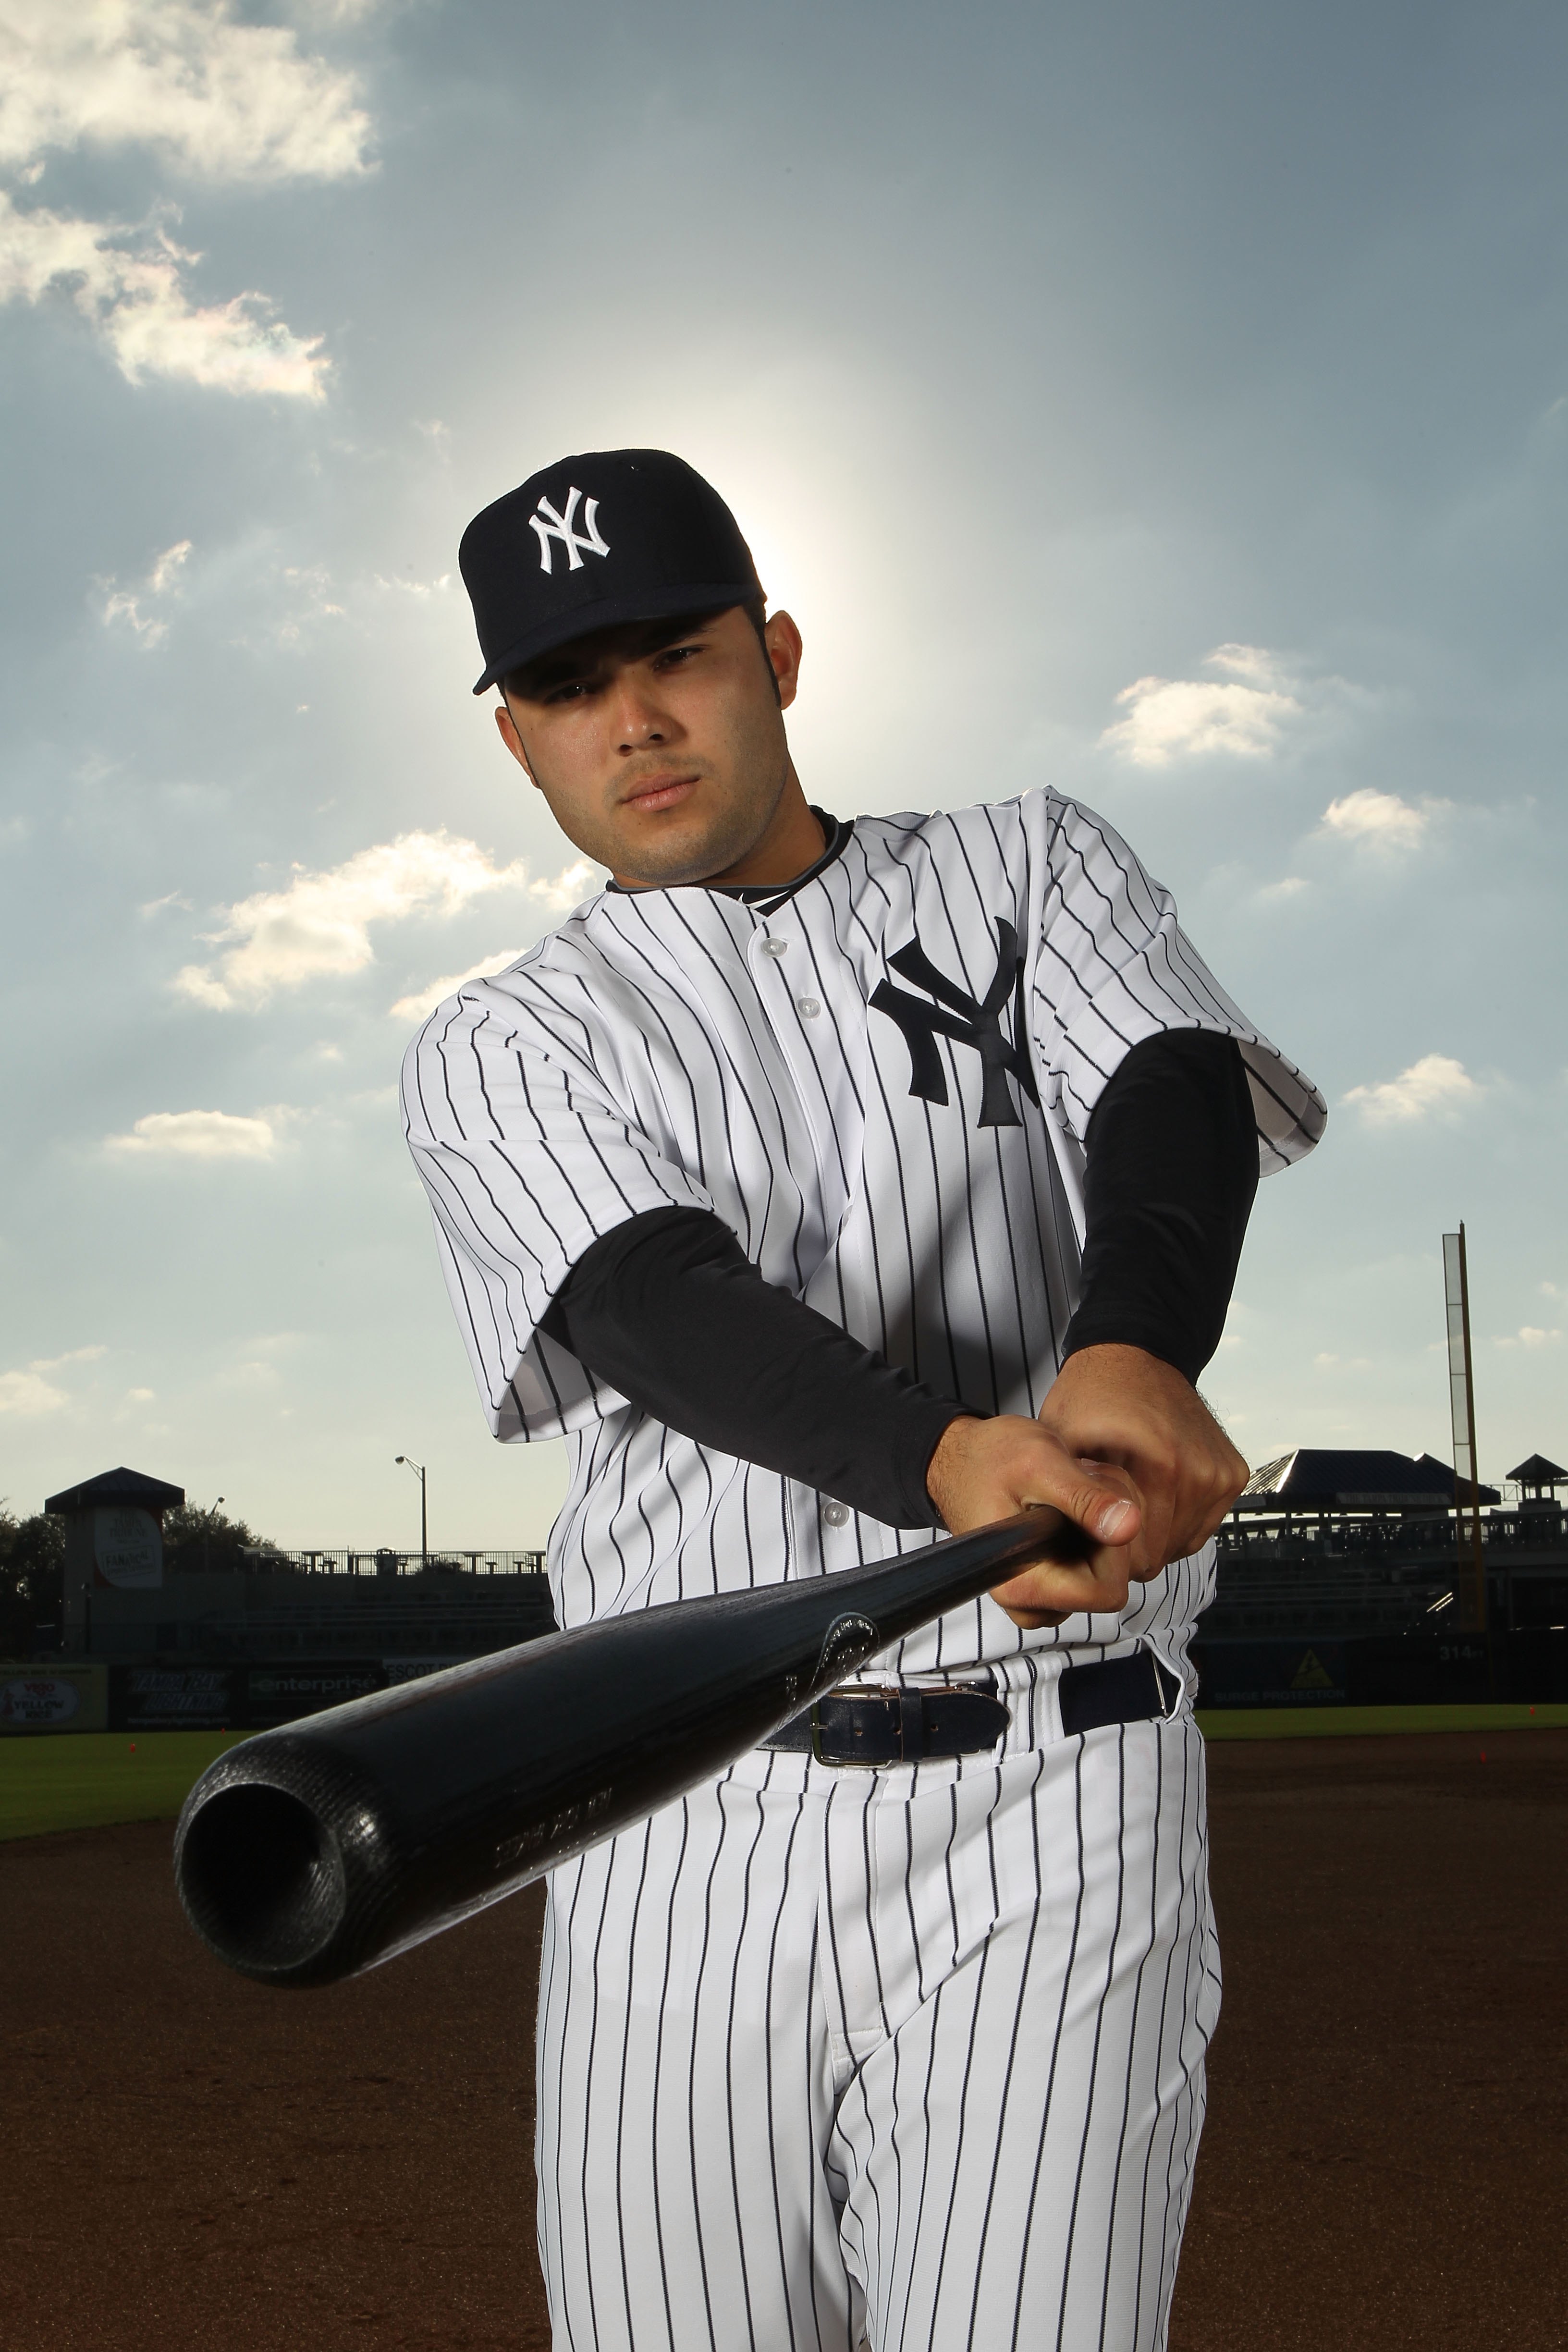 TAMPA, FL - FEBRUARY 25:  Jesus Montero #83 of the New York Yankees poses for a photo during Spring Training Media Photo Day at George M. Steinbrenner Field on February 25, 2010 in Tampa, Florida.  (Photo by Nick Laham/Getty Images)